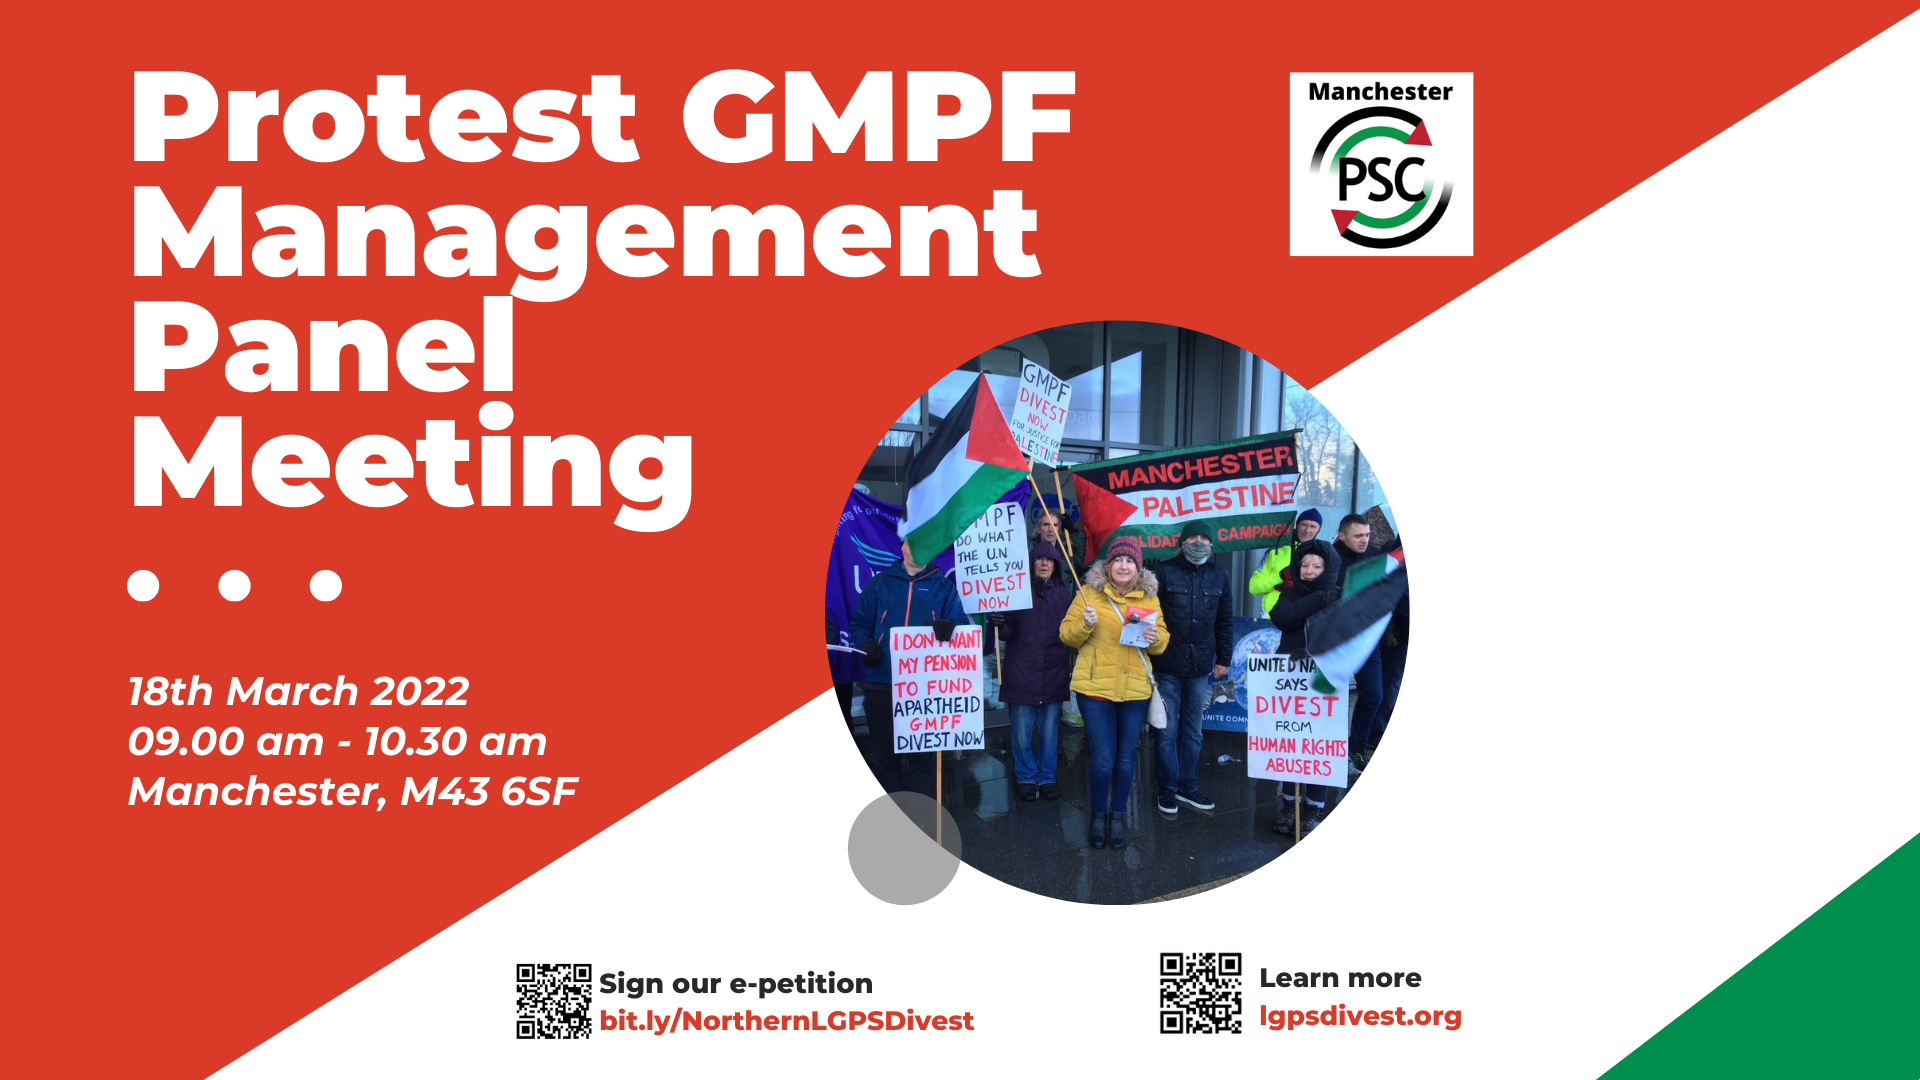 Protest GMPF Management Panel Meeting